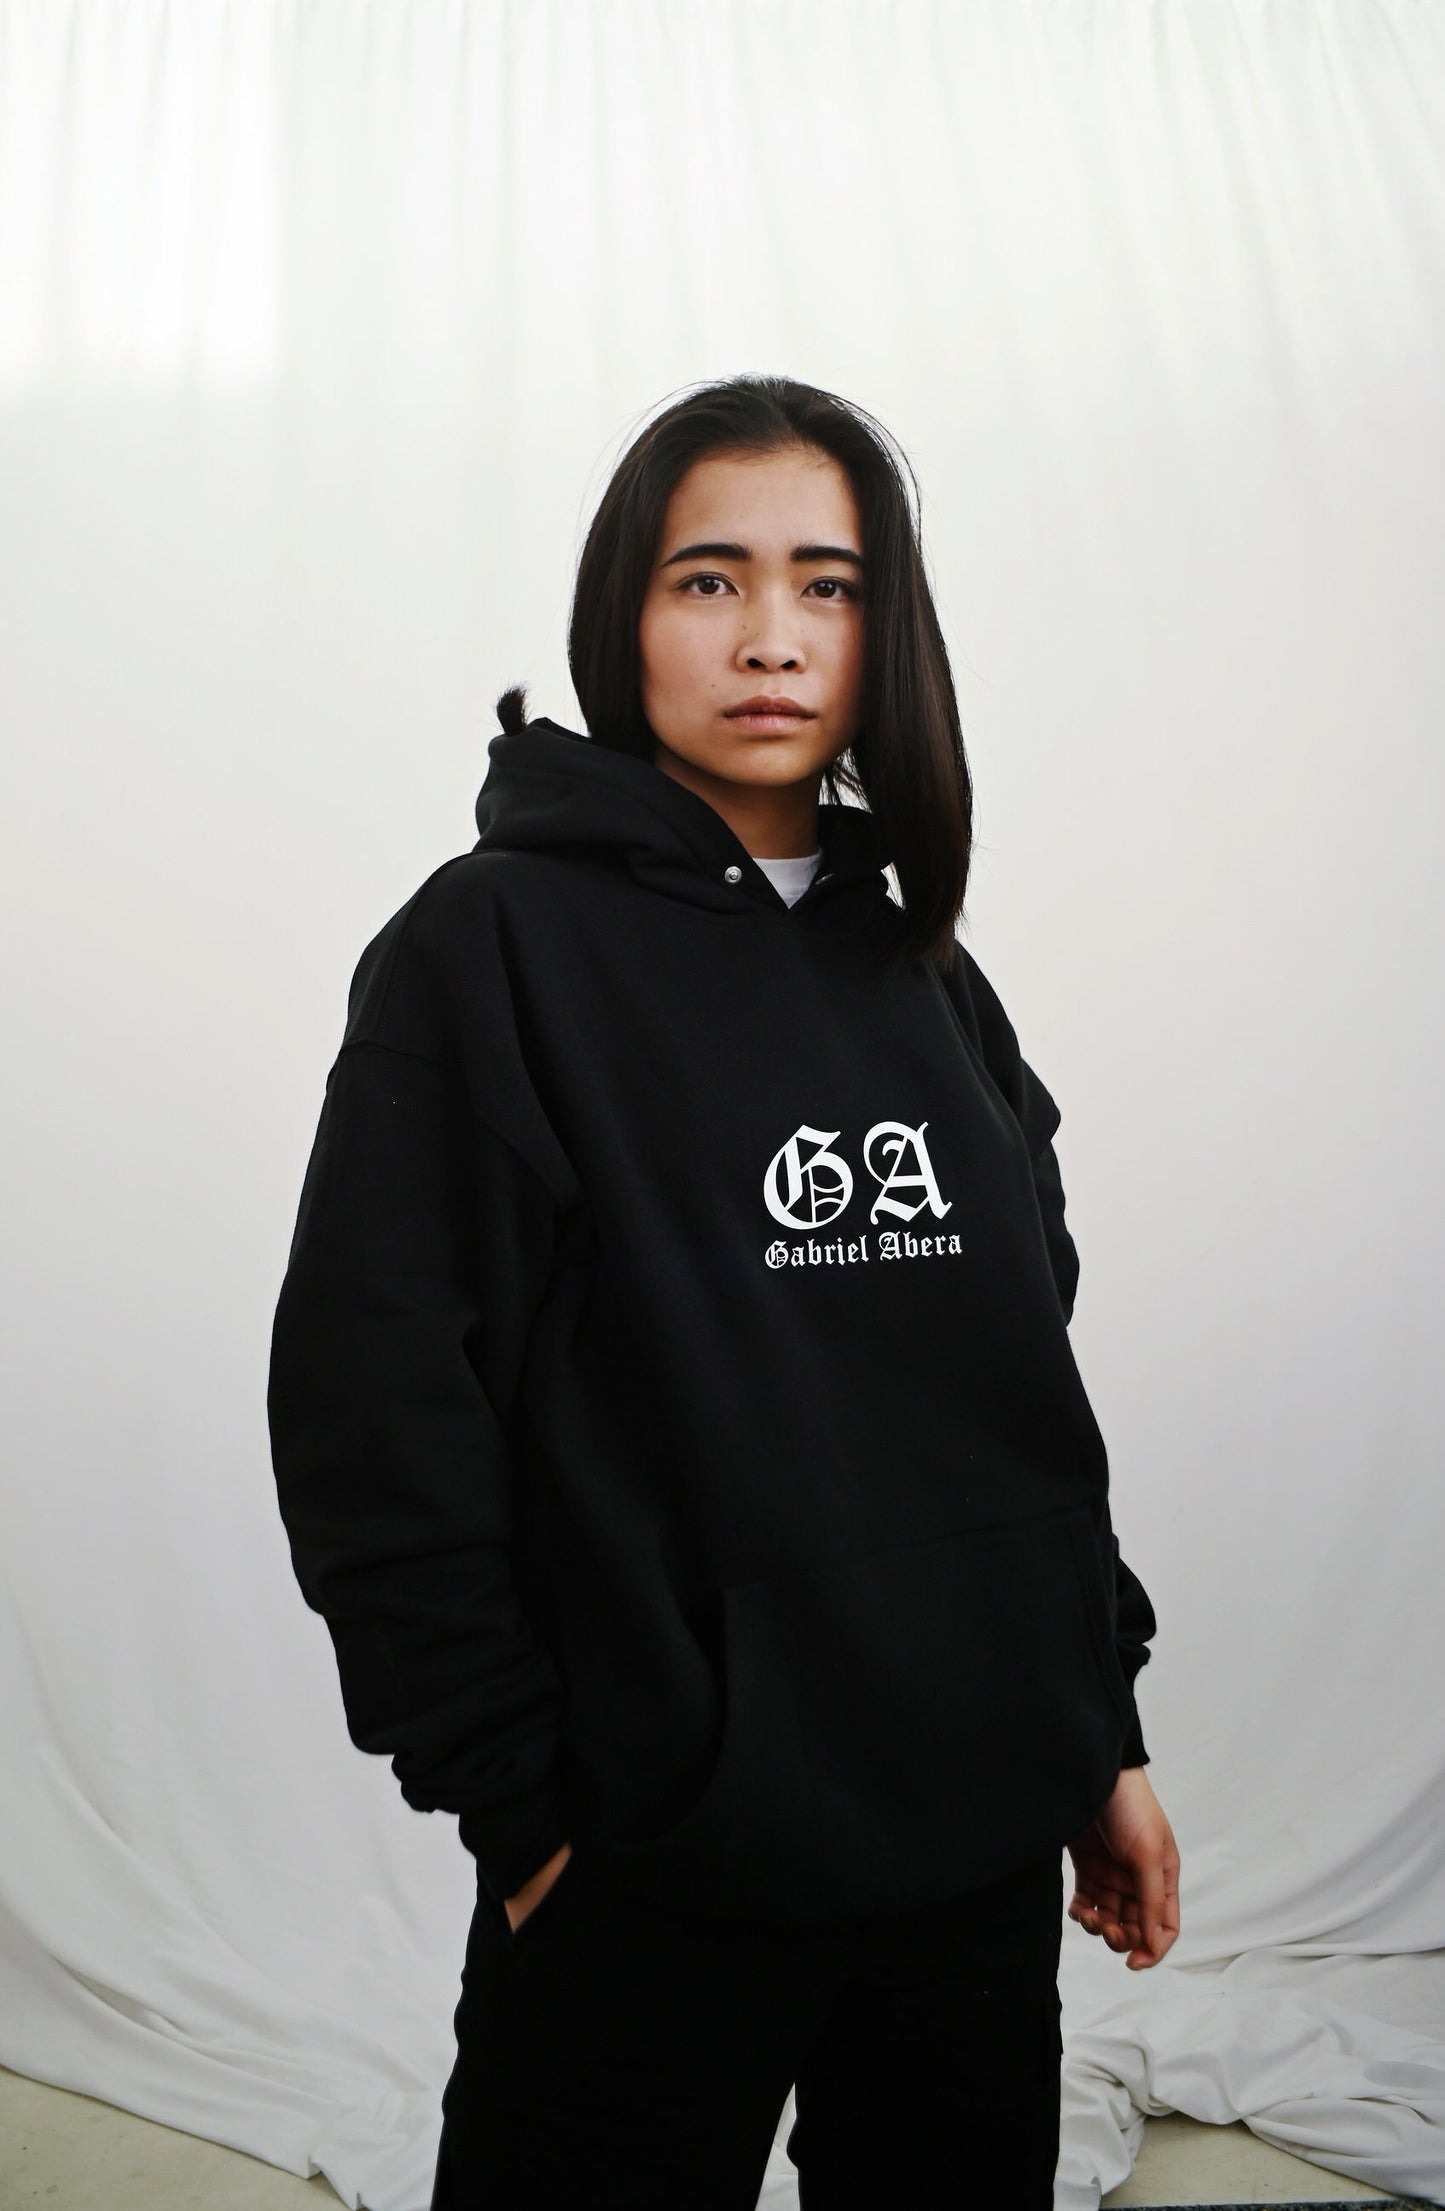 Female model wearing a Black oversize hoodie with white brand design on the front